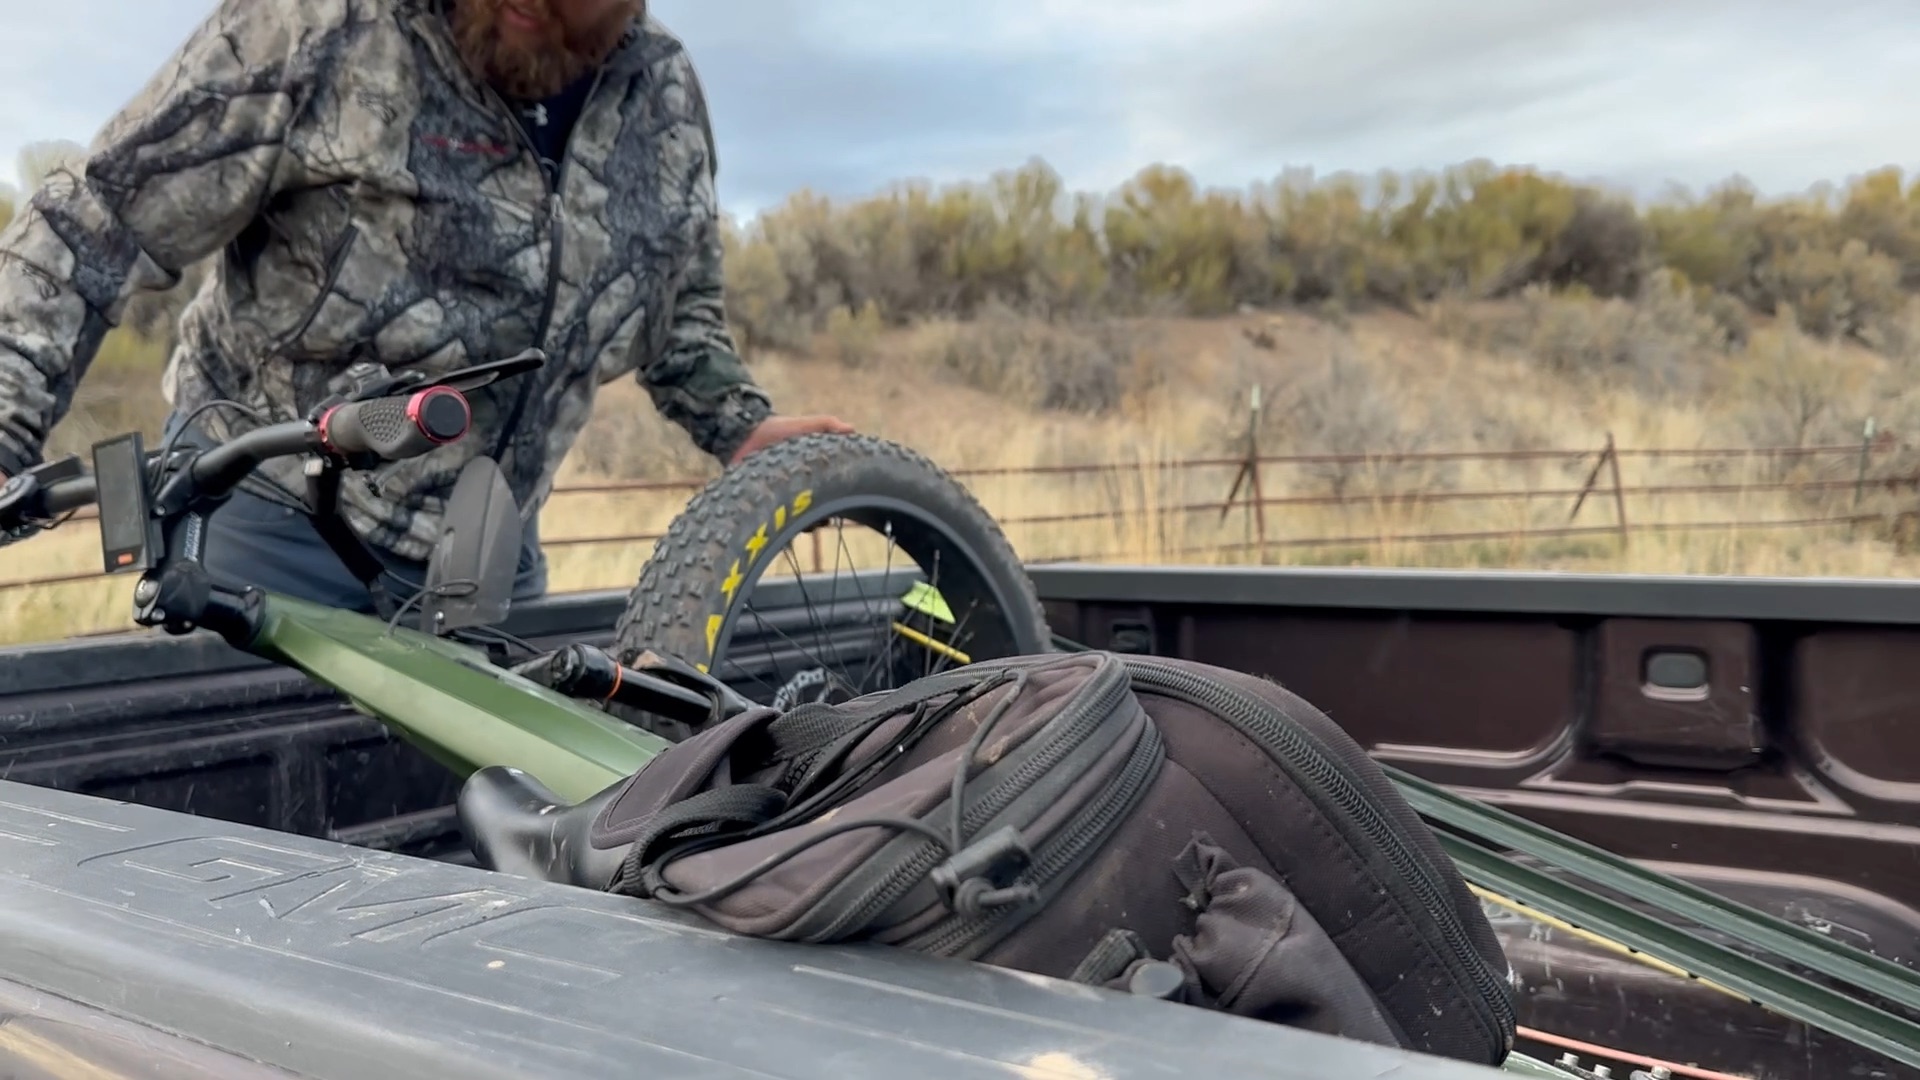 A hunter loading an electric bike into the bed of a pickup.